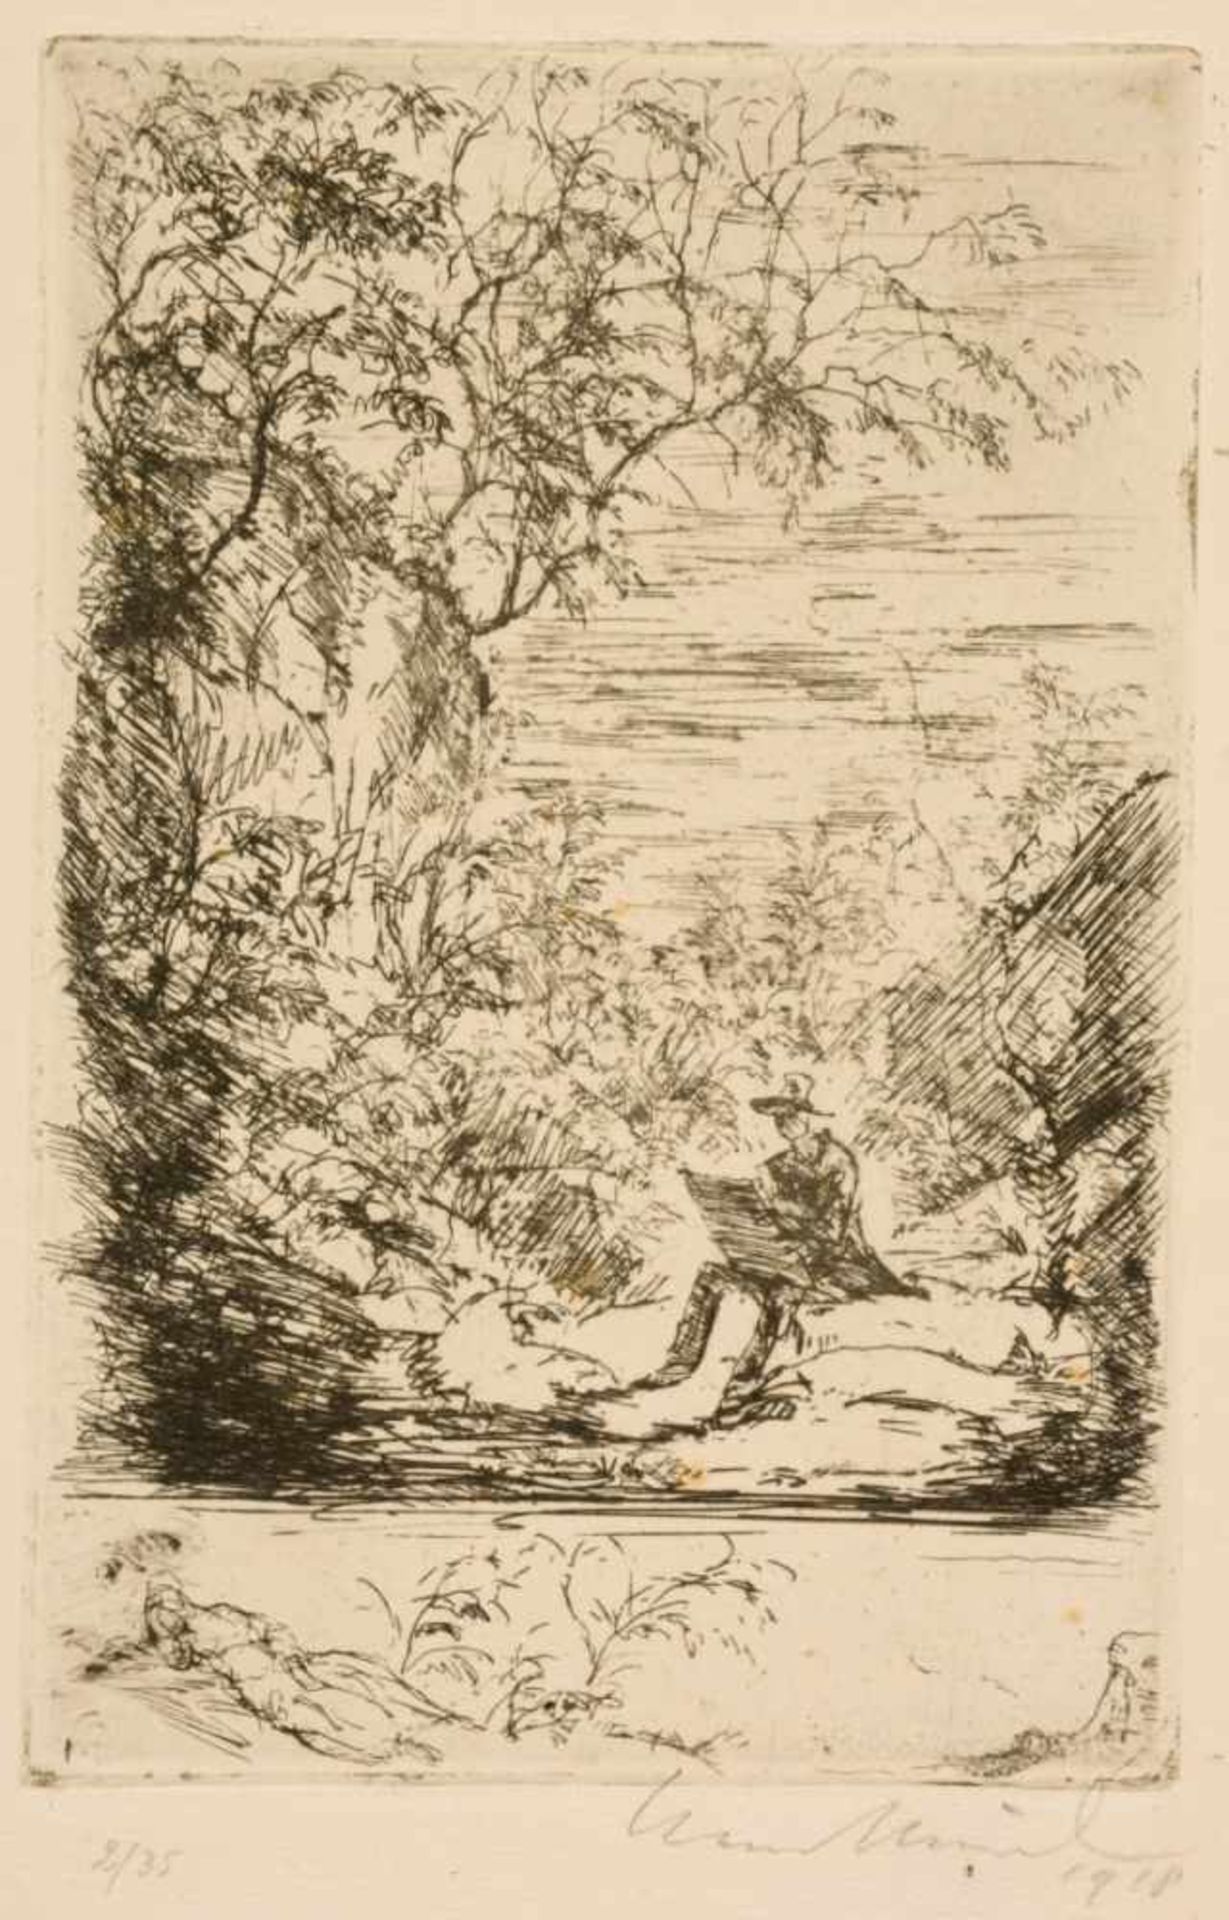 Hans MEID (1883-1957), The painter in the landscape, etching,2/35, signed with pencil anddated 1918,